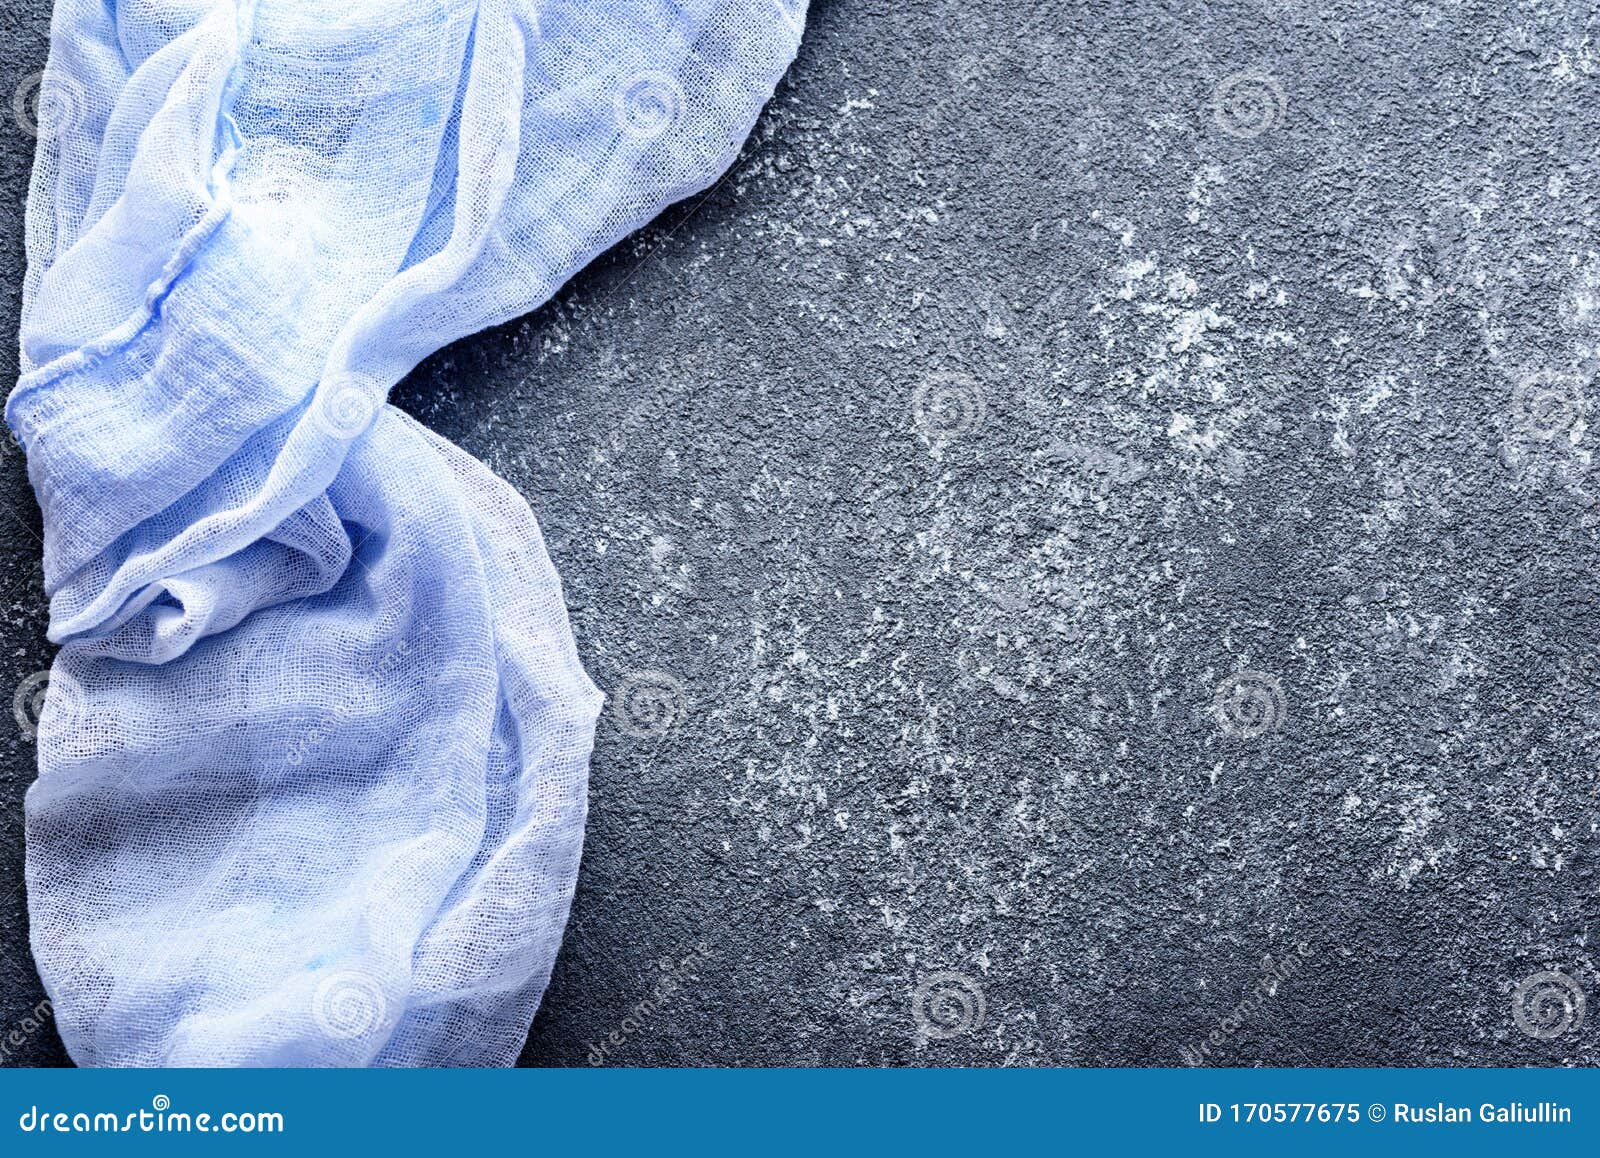 41 263 Background Blue Menu Photos Free Royalty Free Stock Photos From Dreamstime